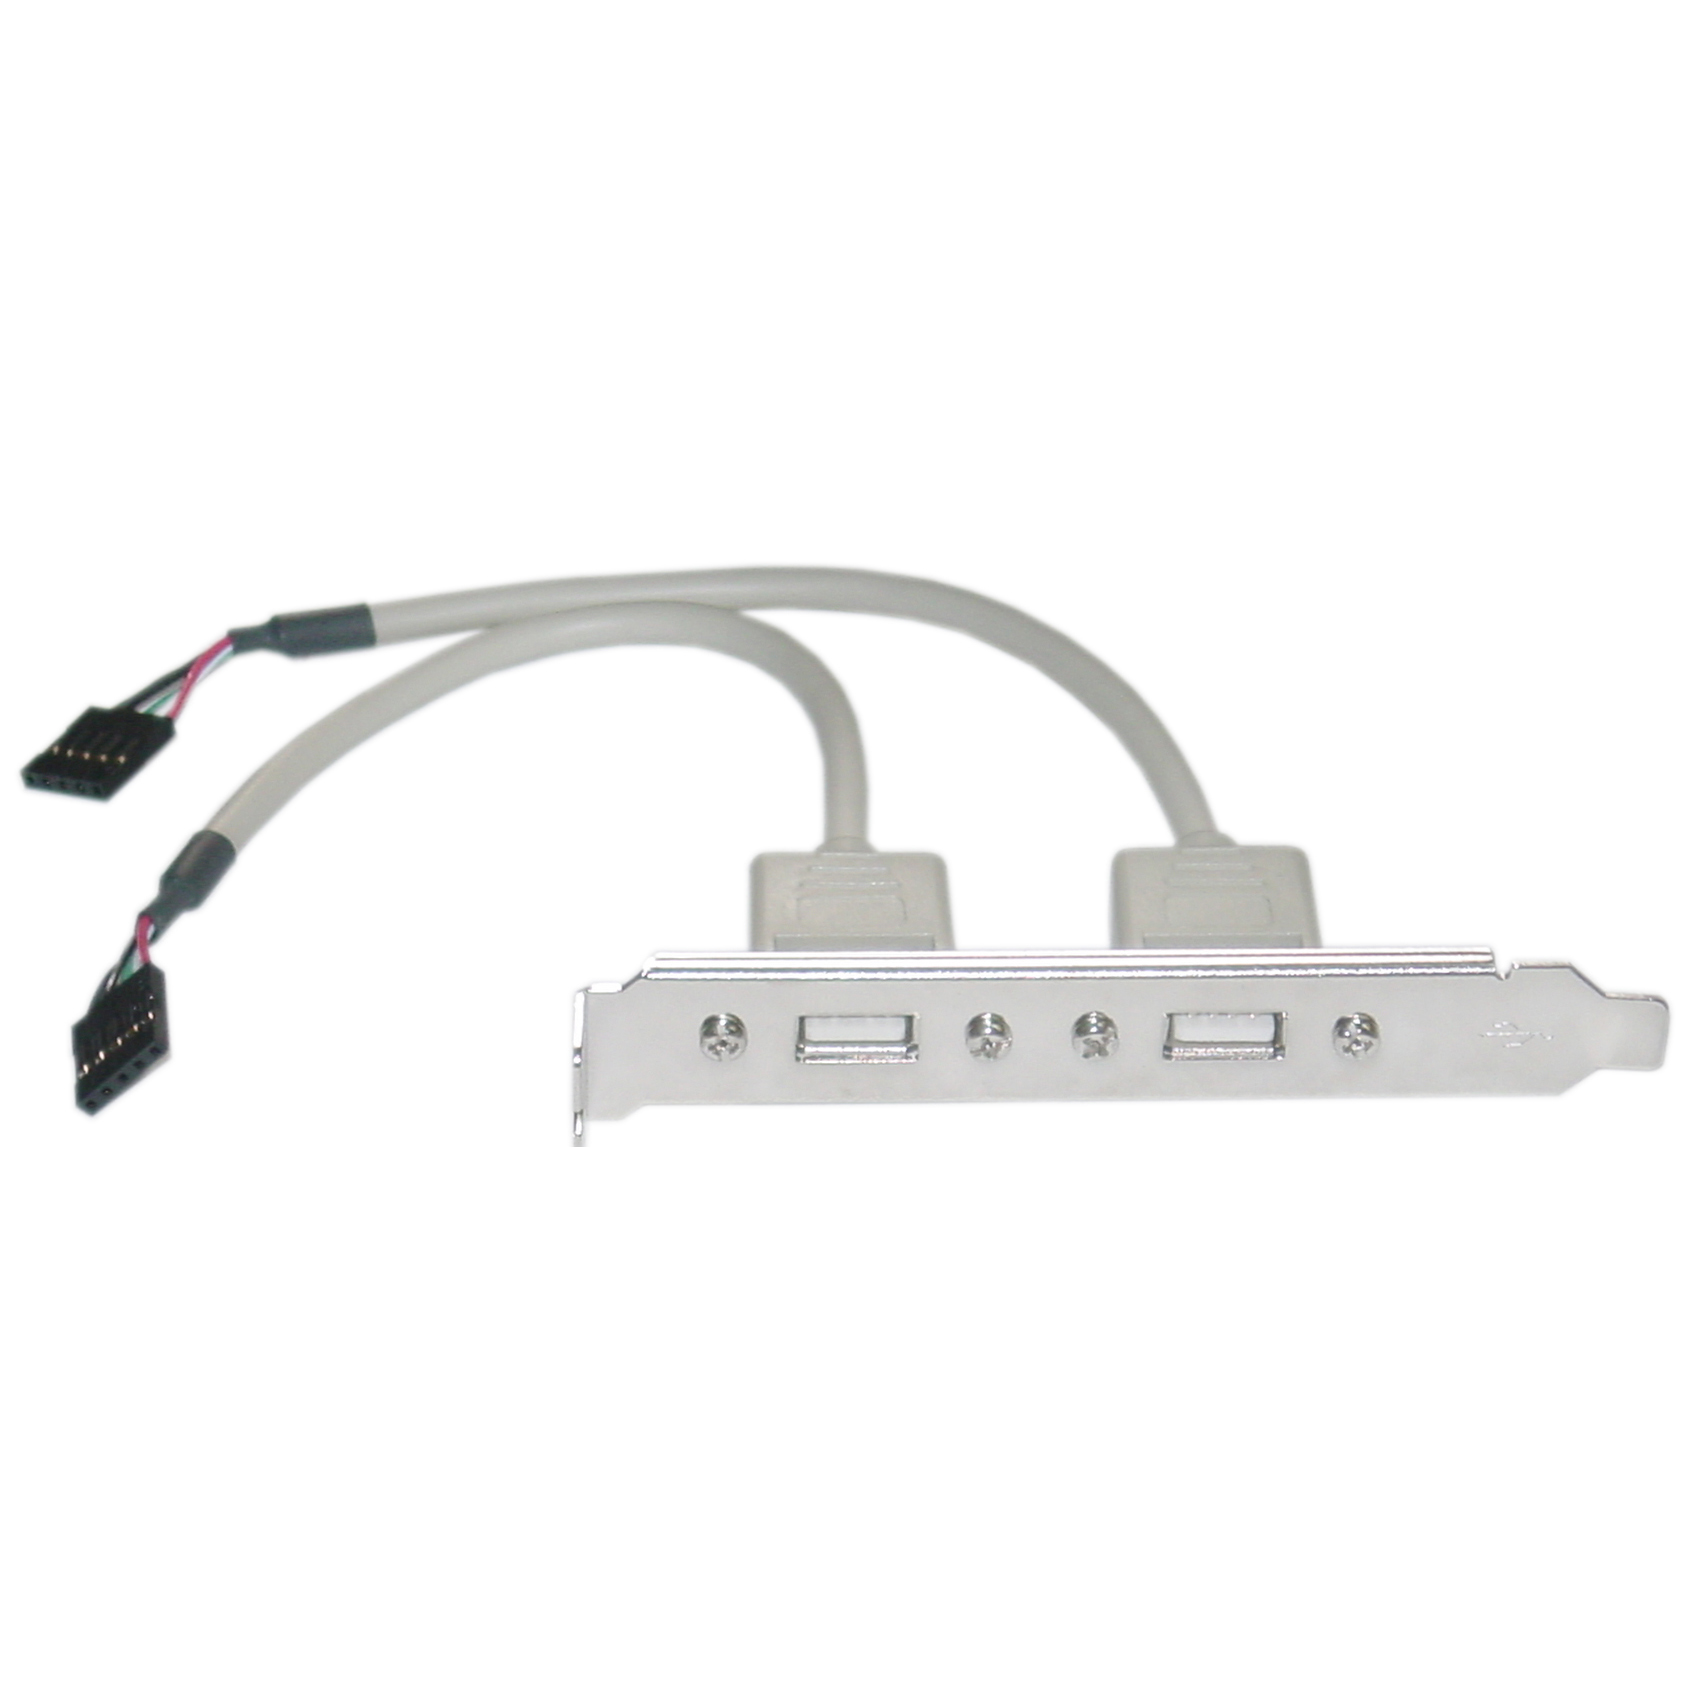 Dual USB Type-A PC Expansion Slot Cover